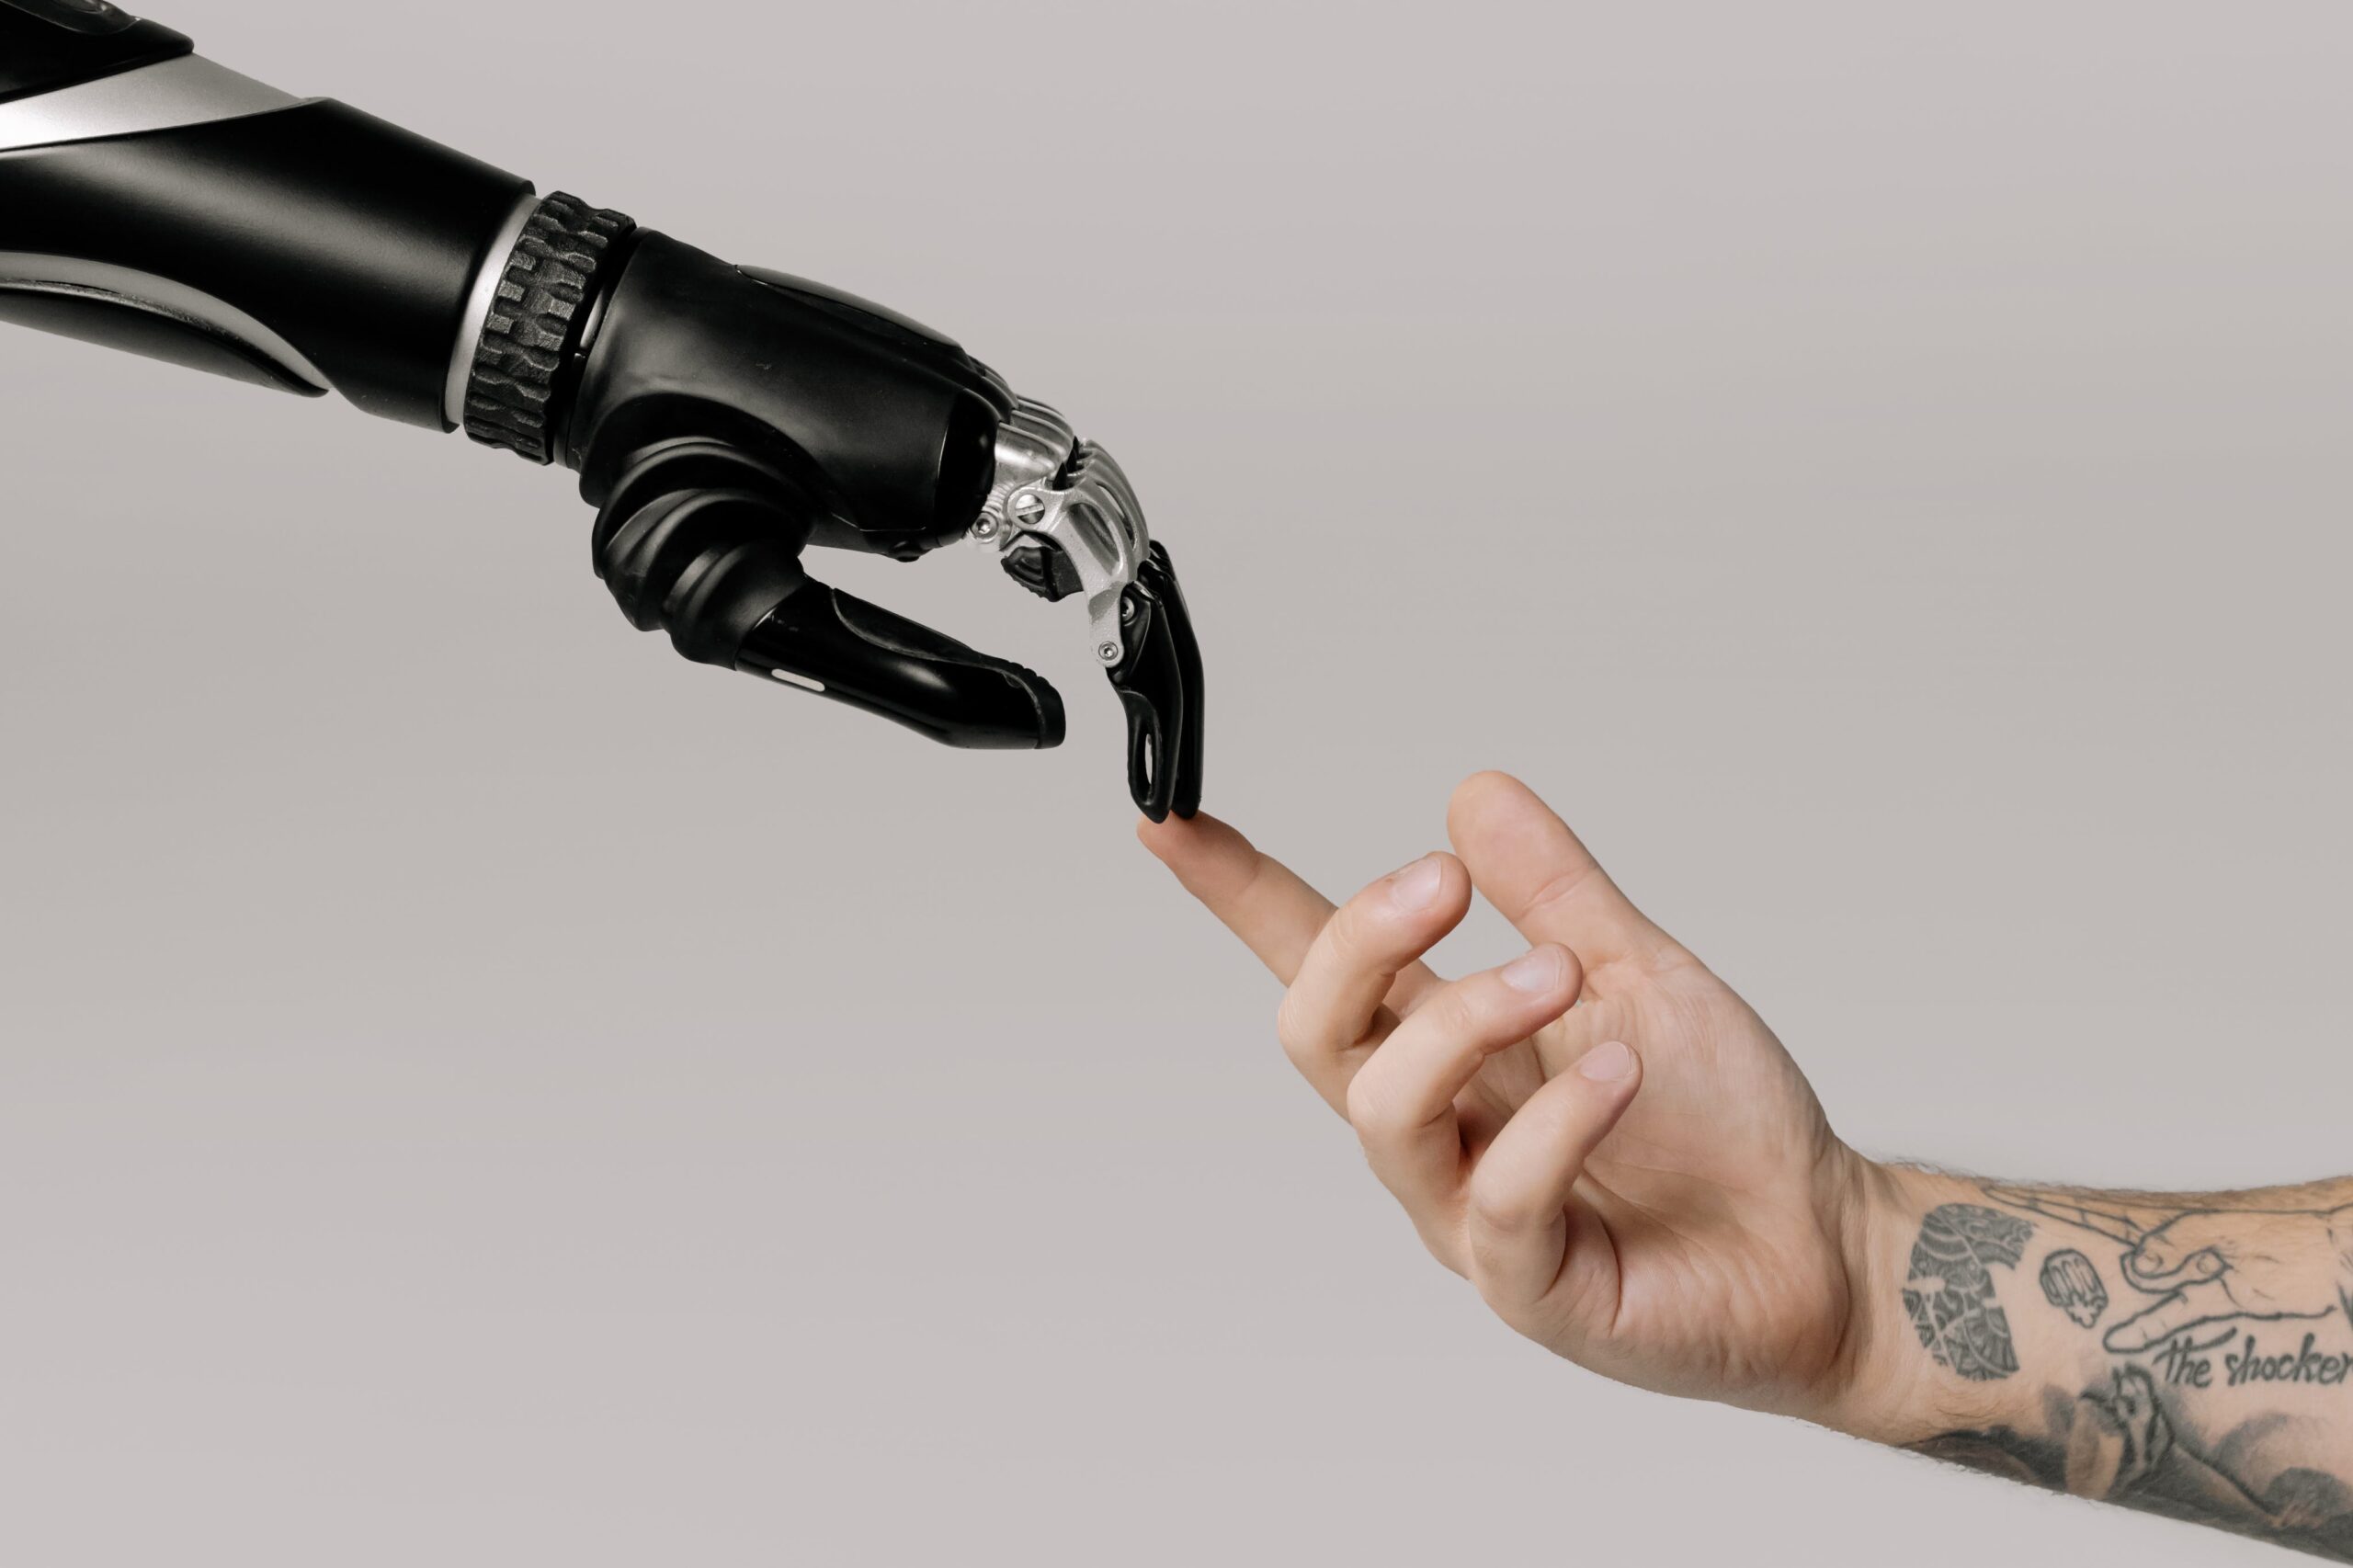 A robotic hand and a human hand with tattoos about to touch fingers, reminiscent of Michelangelo's 'Creation of Adam', symbolizing the intersection of humanity and technology.